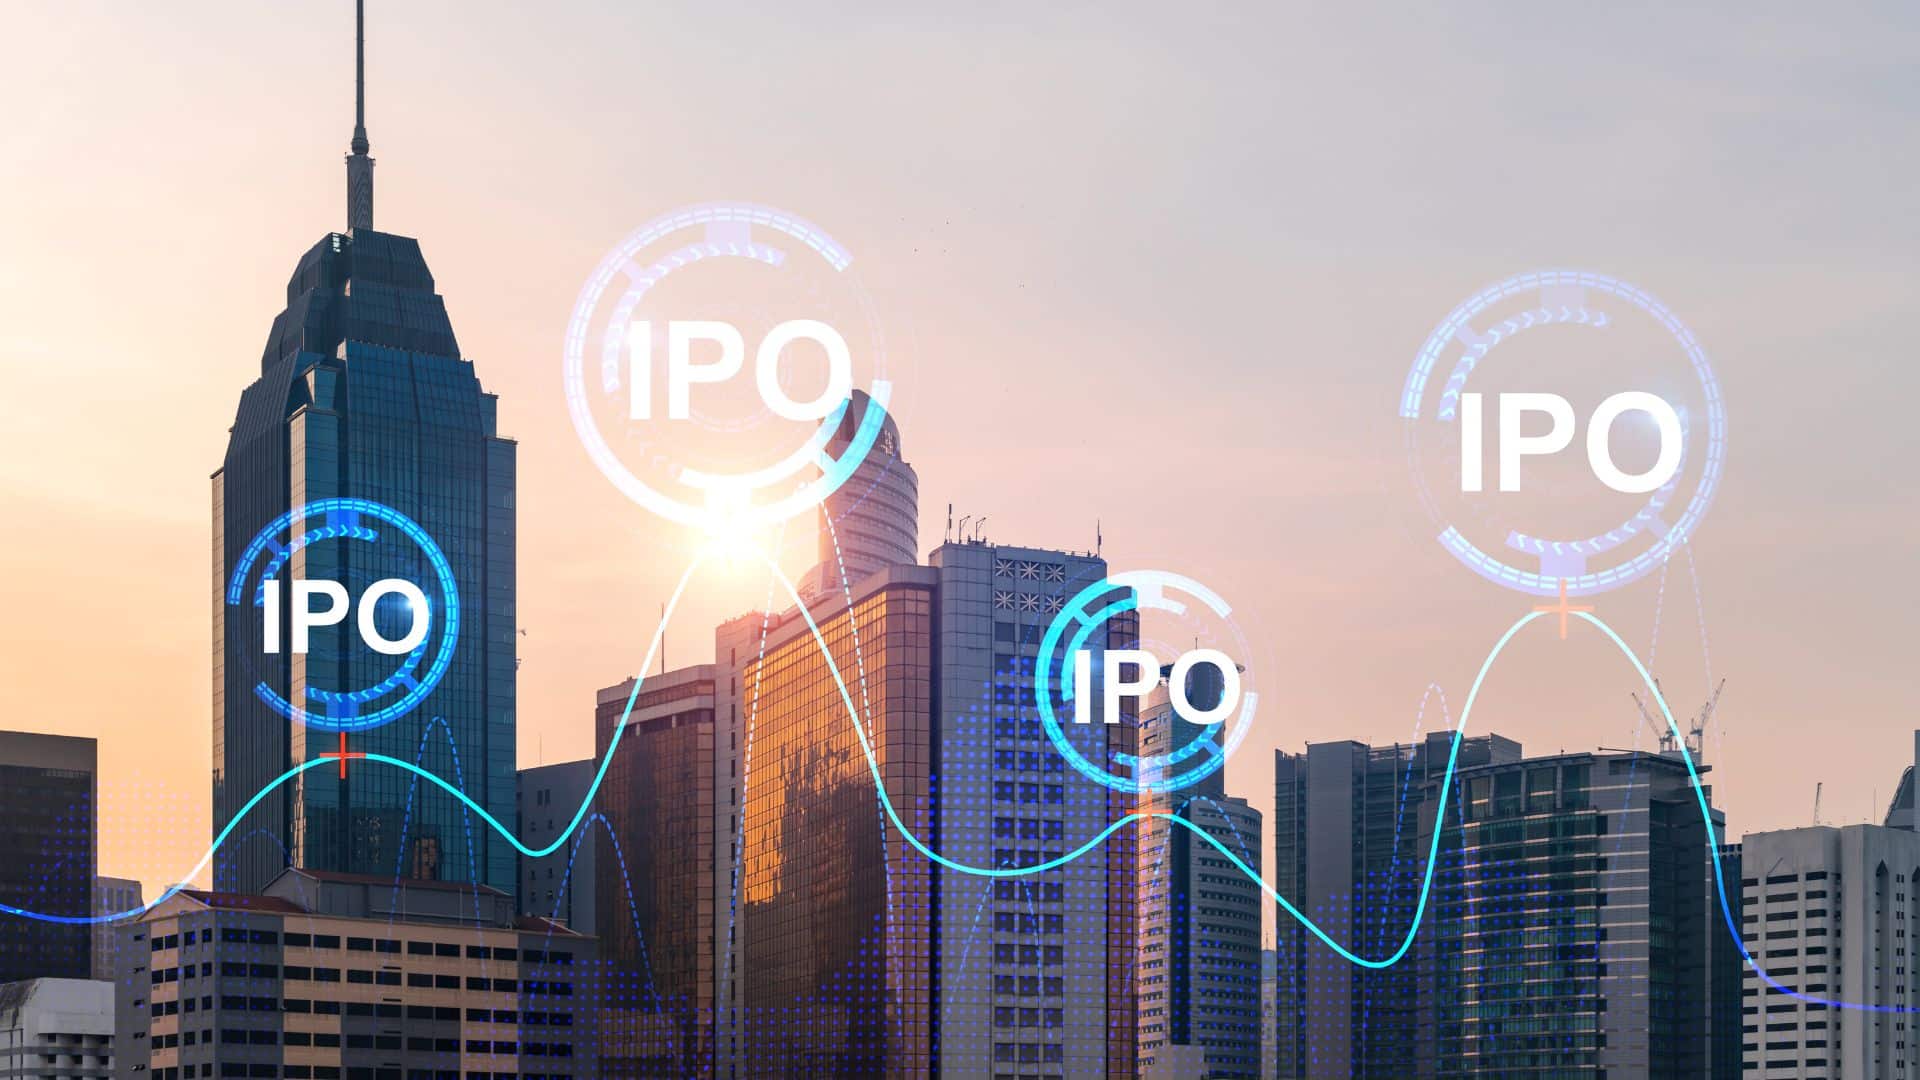 IPO is one of an exit strategy that enables you to exit from the investment also benefit investors because IPO investing allows investors to purchase shares of a company when it goes public. Purchasing IPO stock could be advantageous if a new public business succeeds.